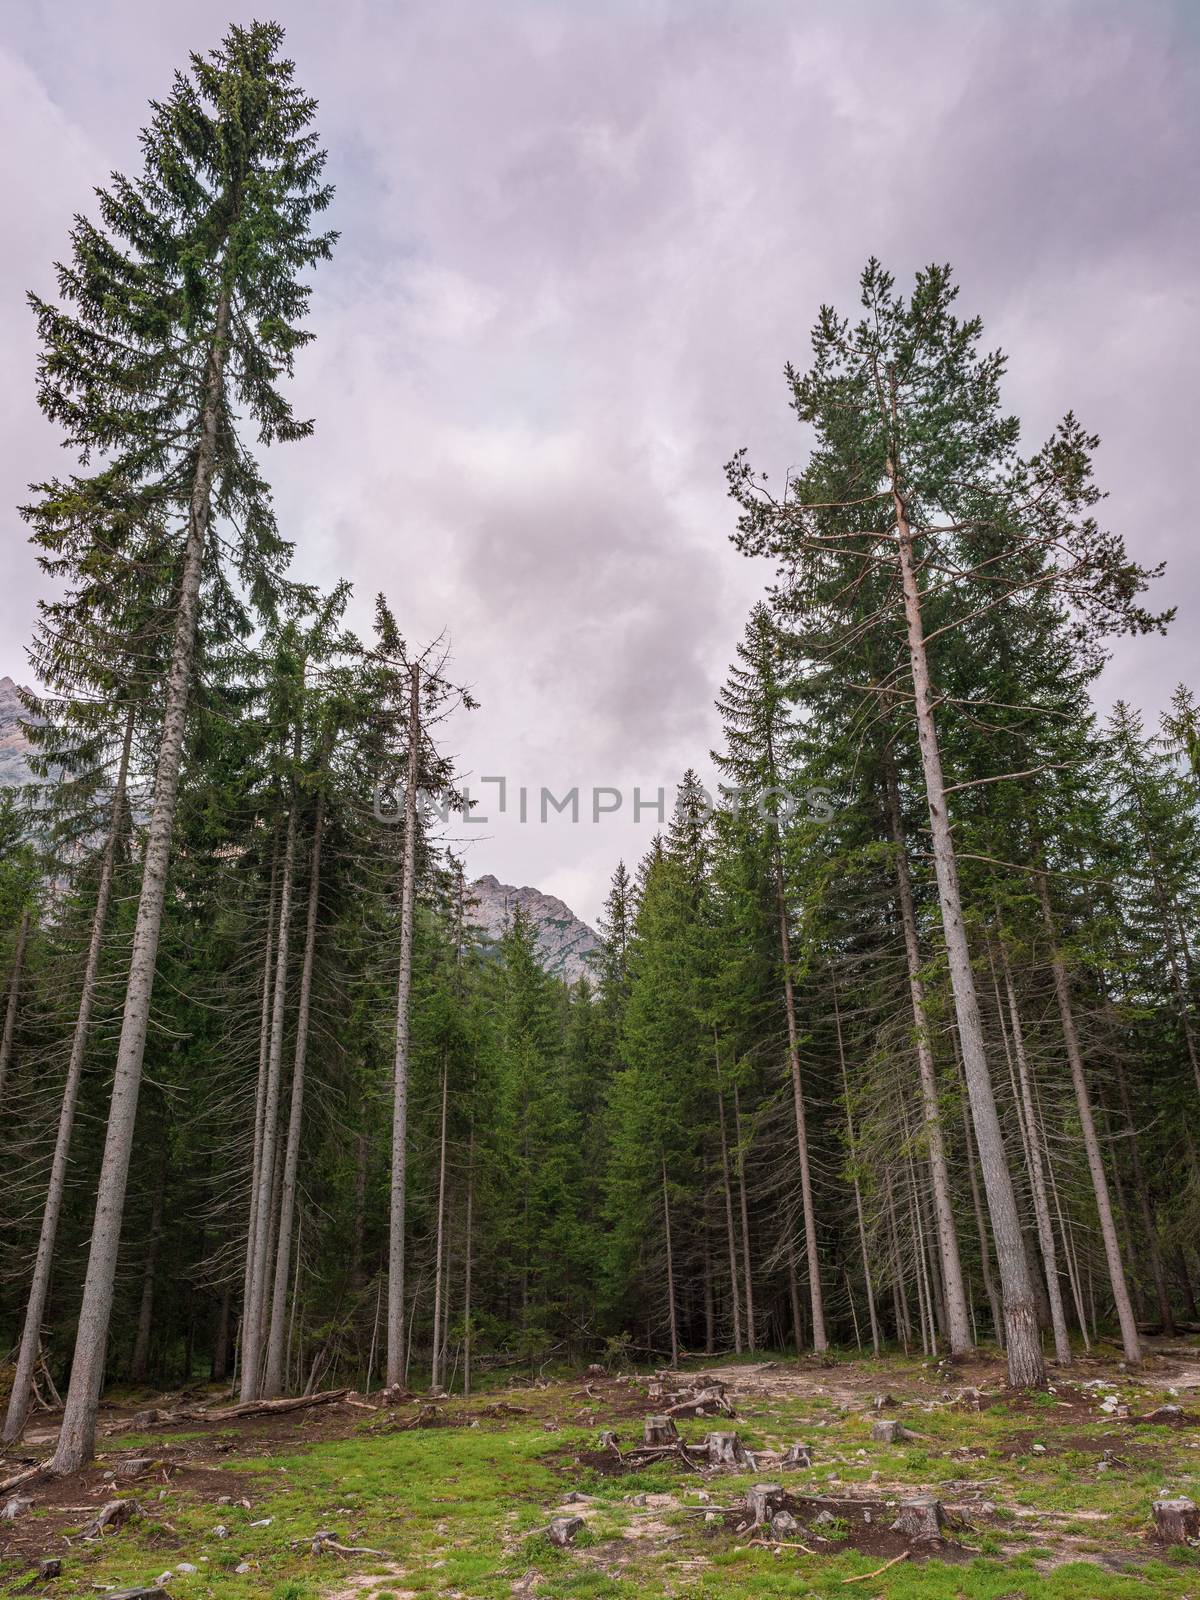 Mountain trees hurl themselves towards the cloudy sky by brambillasimone